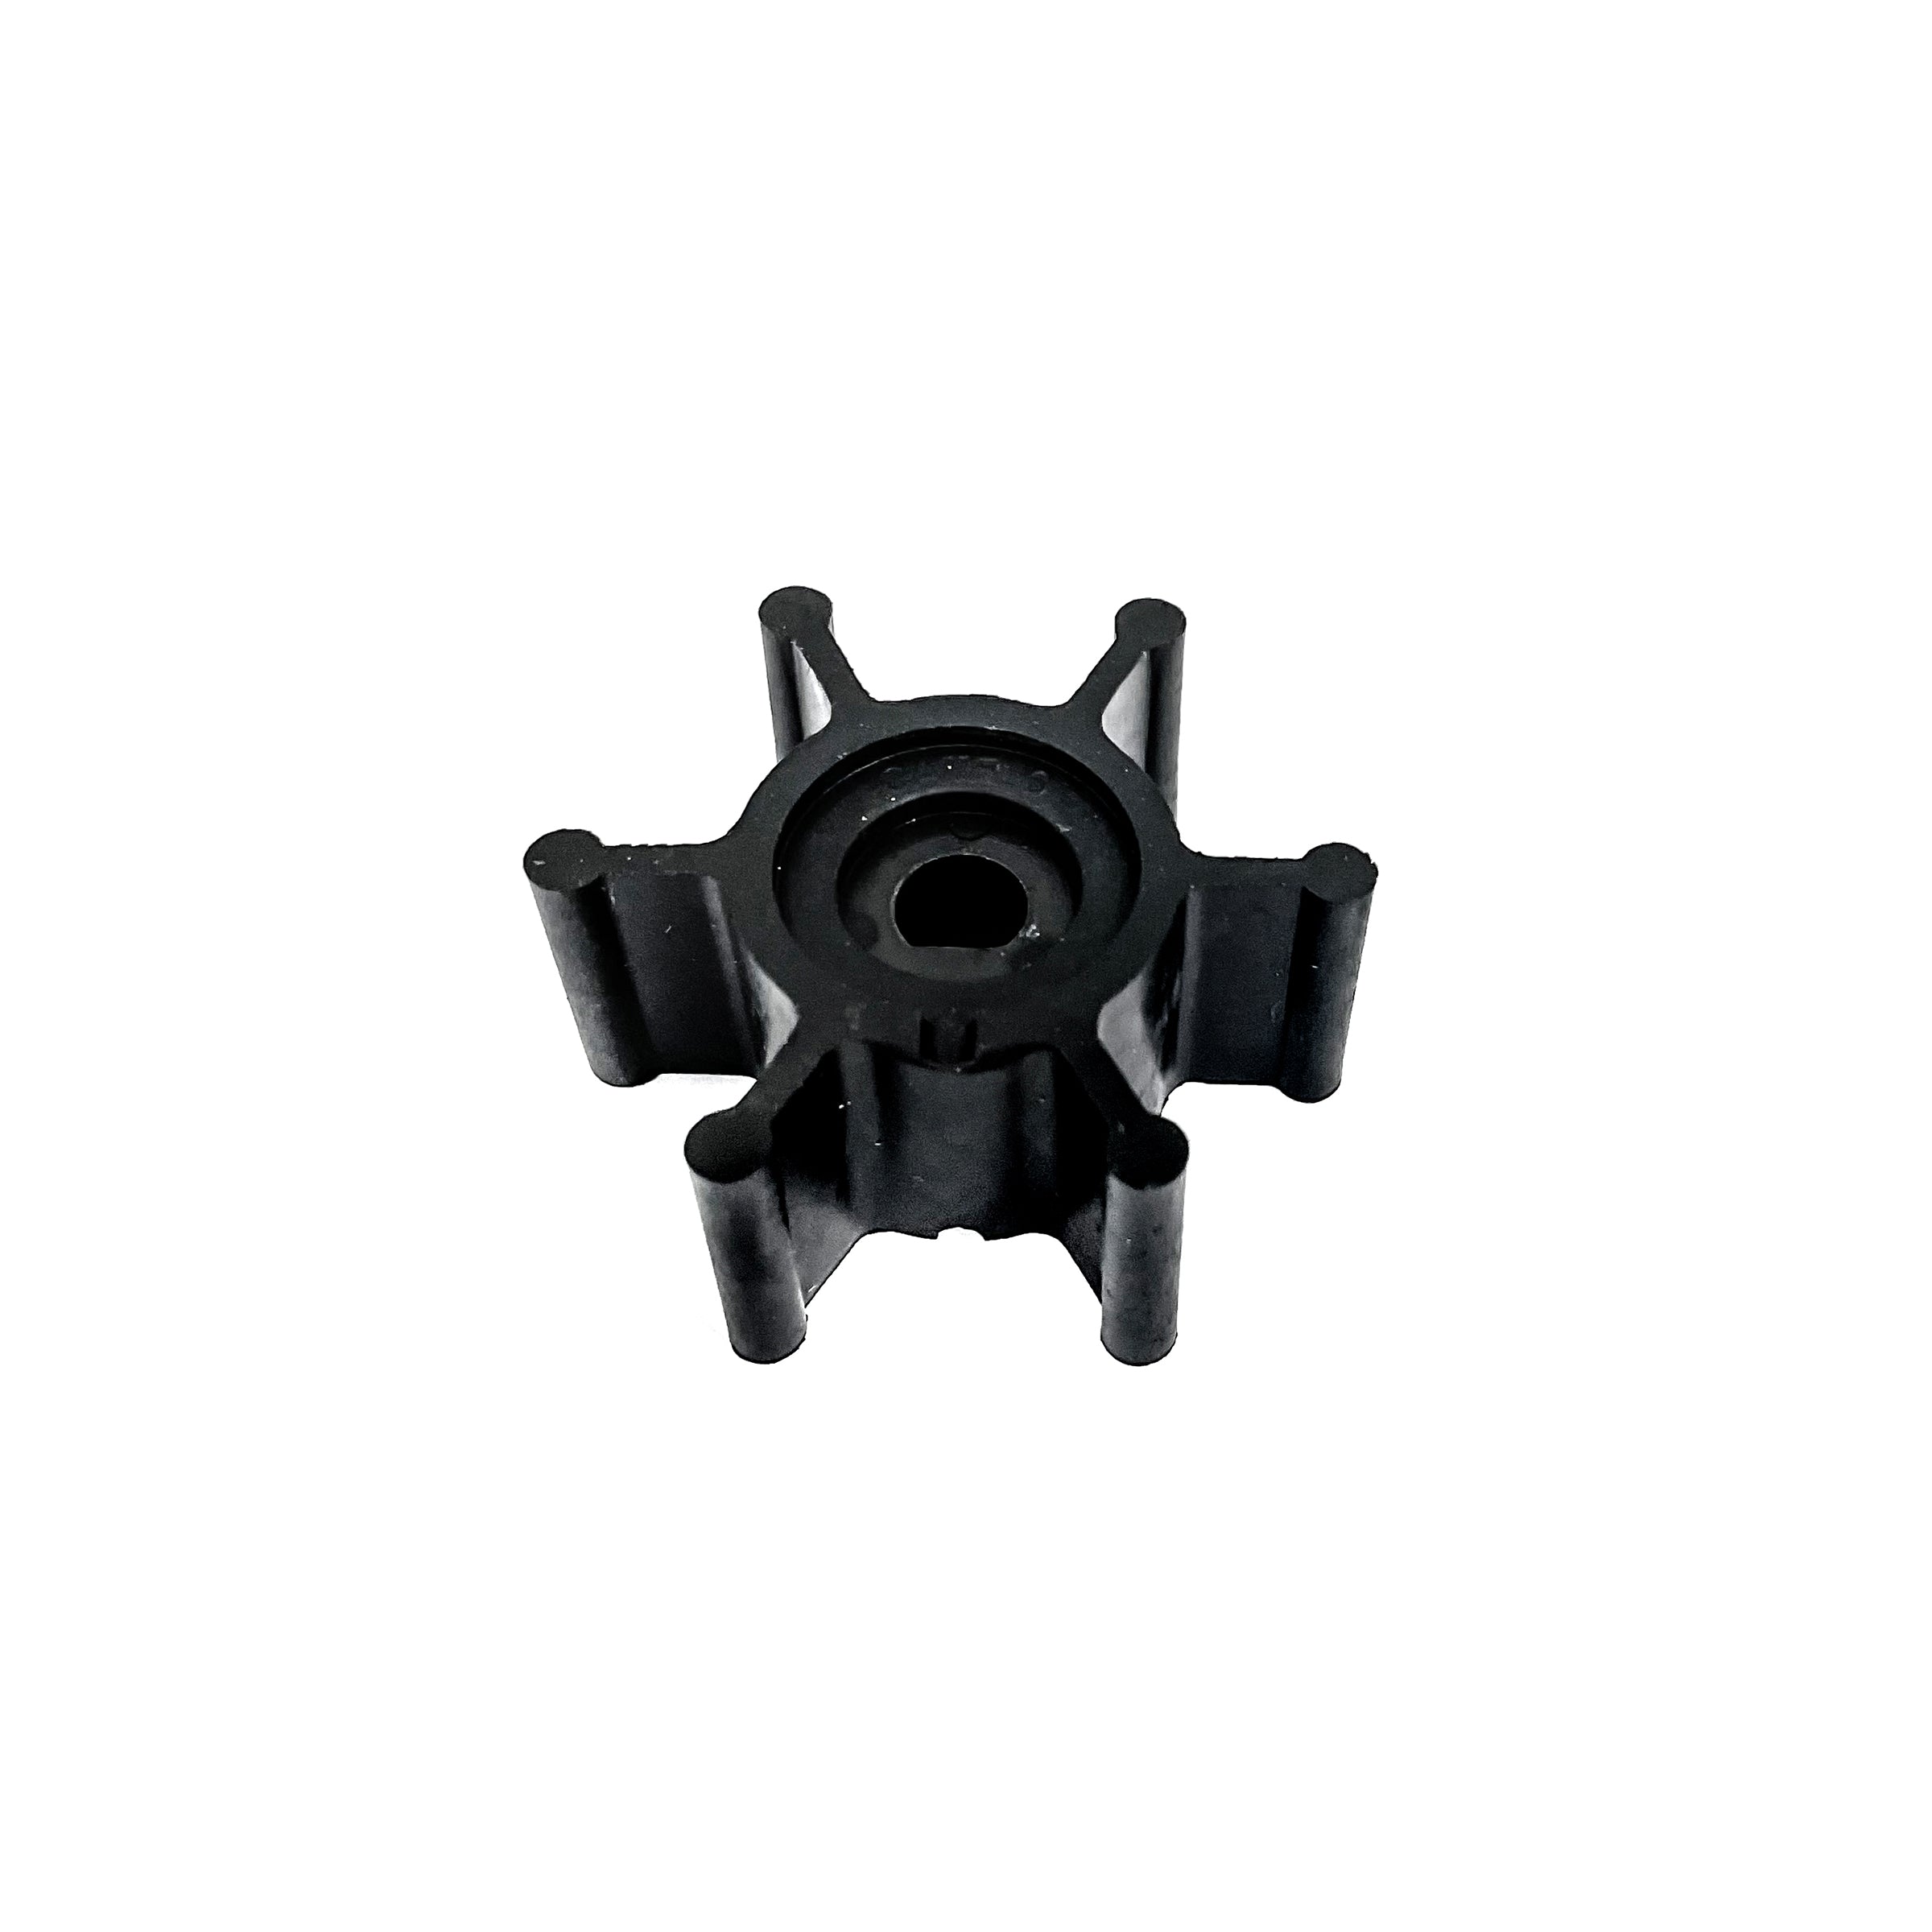 12v pump replacement impeller